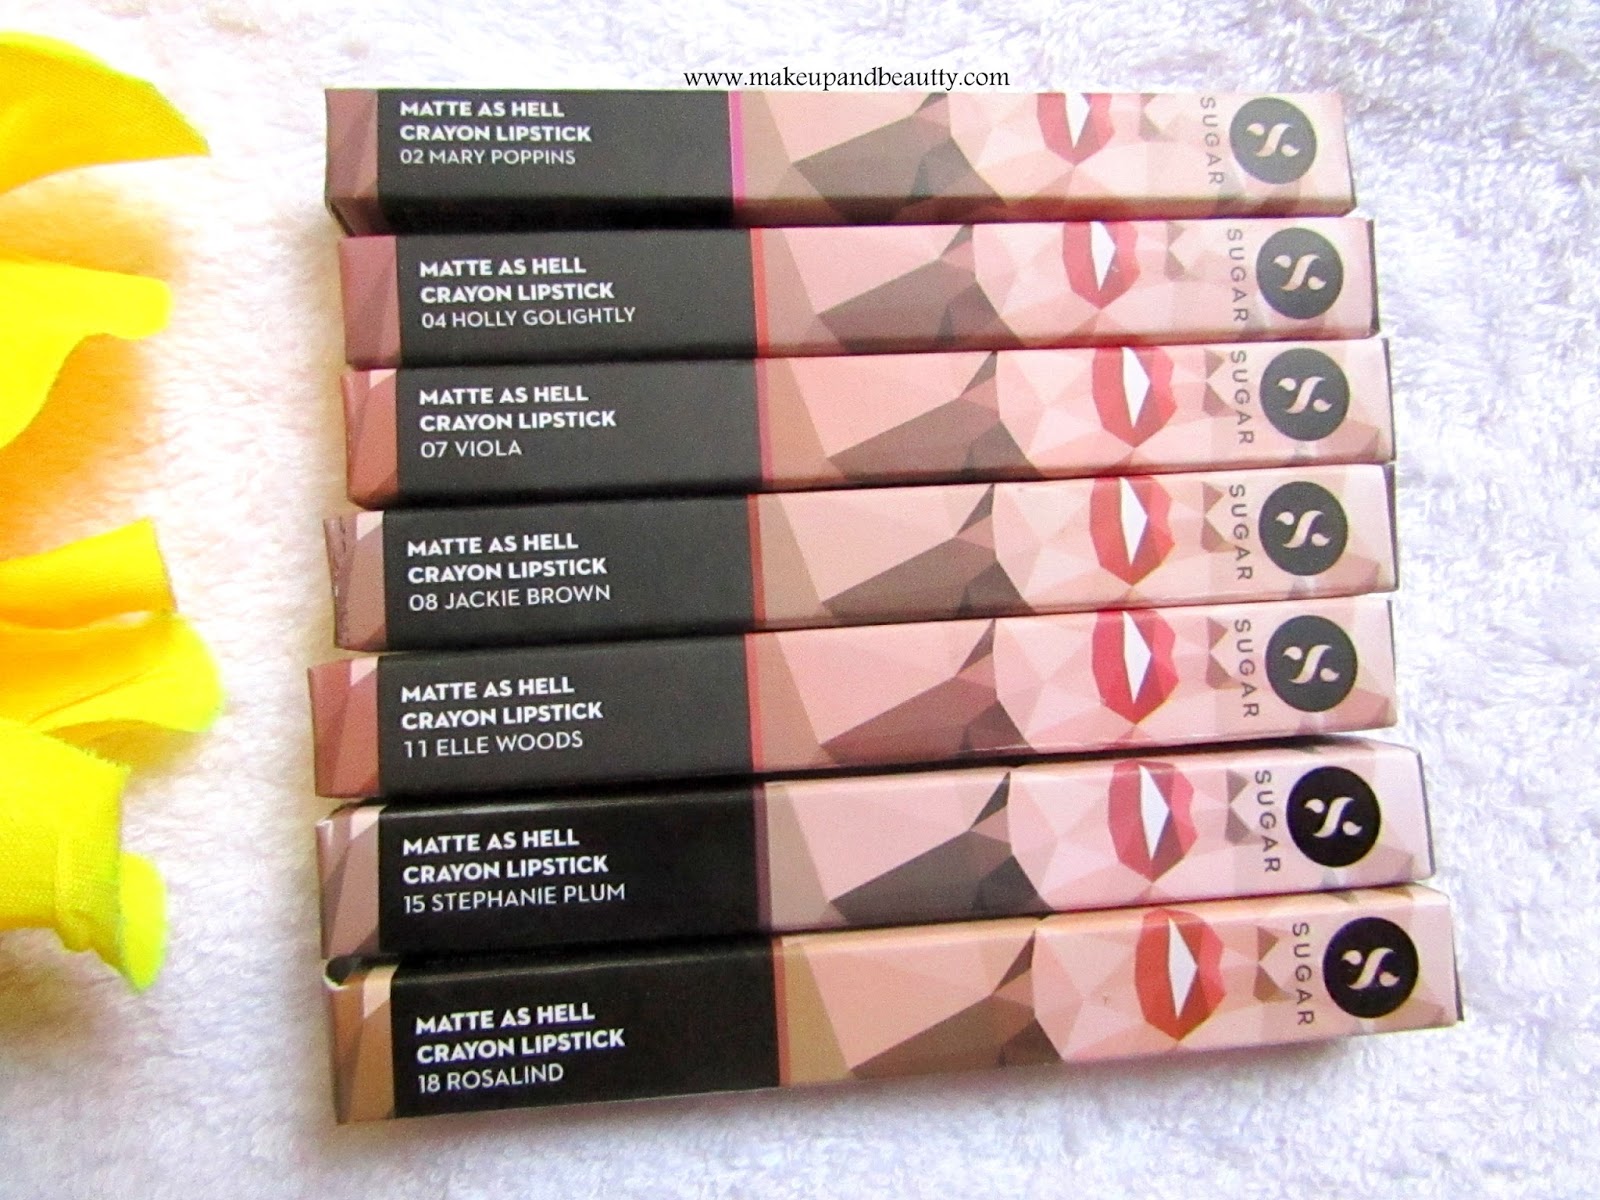 Makeup and beauty !!!: SWATCHES OF SUGAR COSMETICS MATTE AS HELL LIP CRAYON